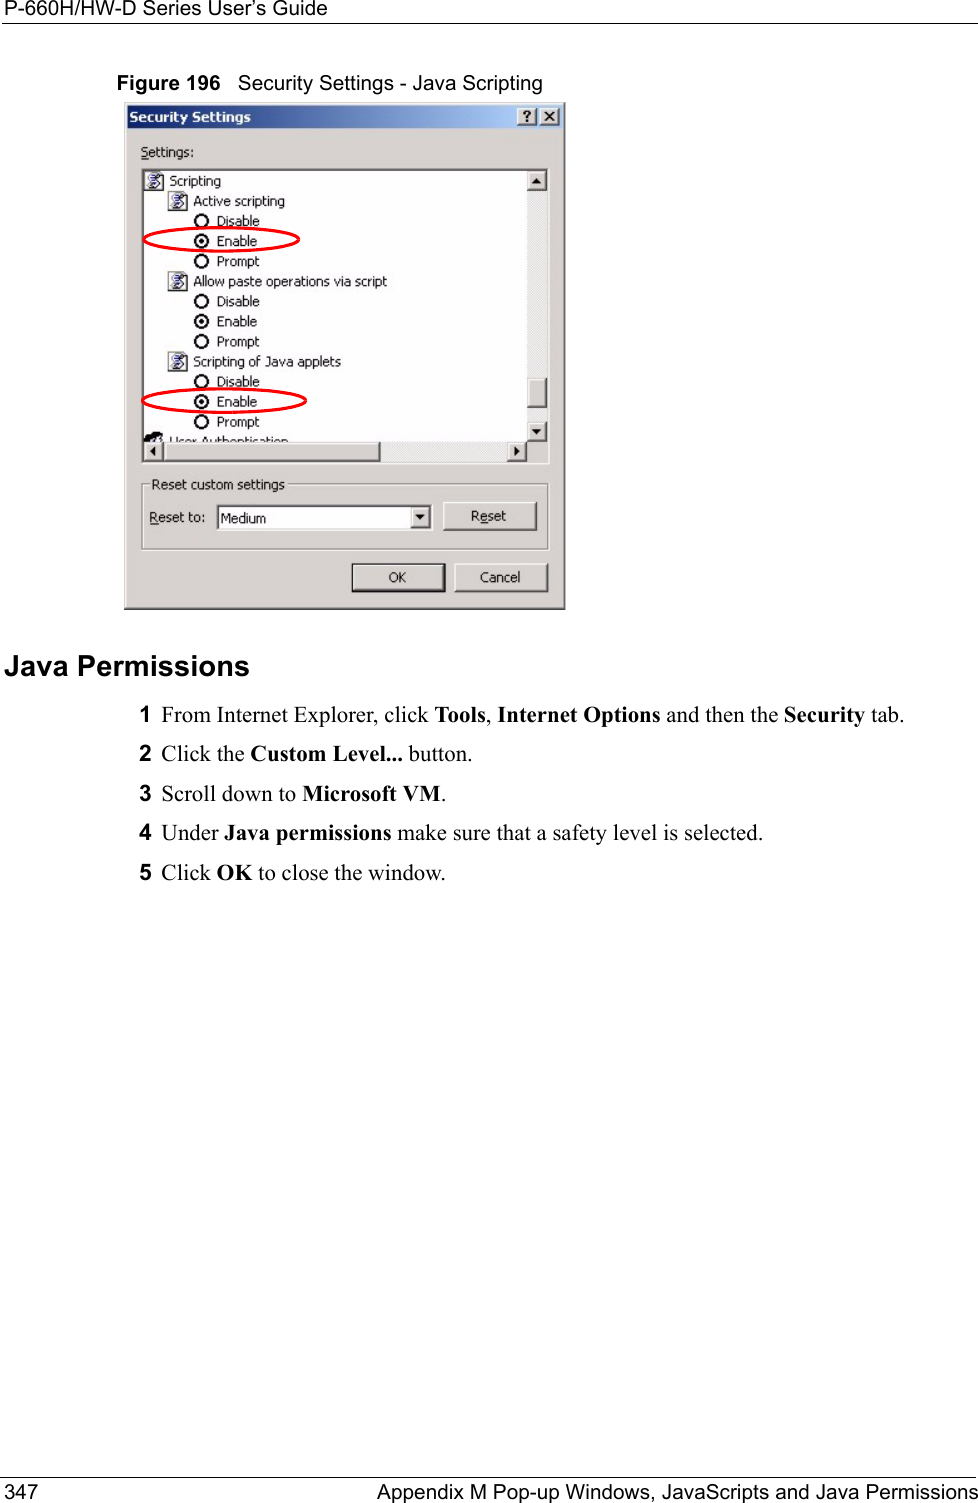 P-660H/HW-D Series User’s Guide347 Appendix M Pop-up Windows, JavaScripts and Java PermissionsFigure 196   Security Settings - Java ScriptingJava Permissions1From Internet Explorer, click Tools, Internet Options and then the Security tab. 2Click the Custom Level... button. 3Scroll down to Microsoft VM. 4Under Java permissions make sure that a safety level is selected.5Click OK to close the window.